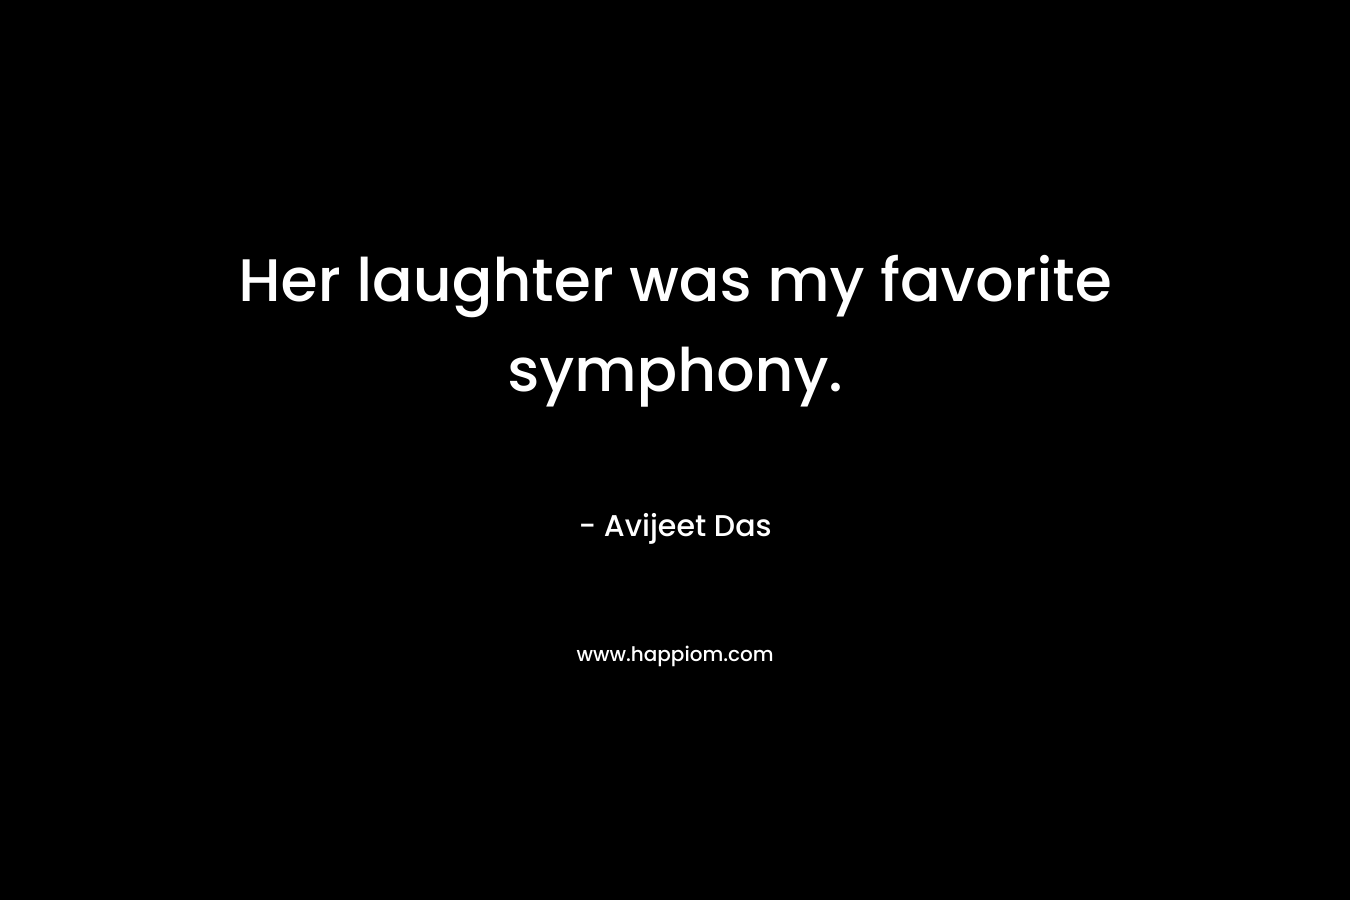 Her laughter was my favorite symphony.